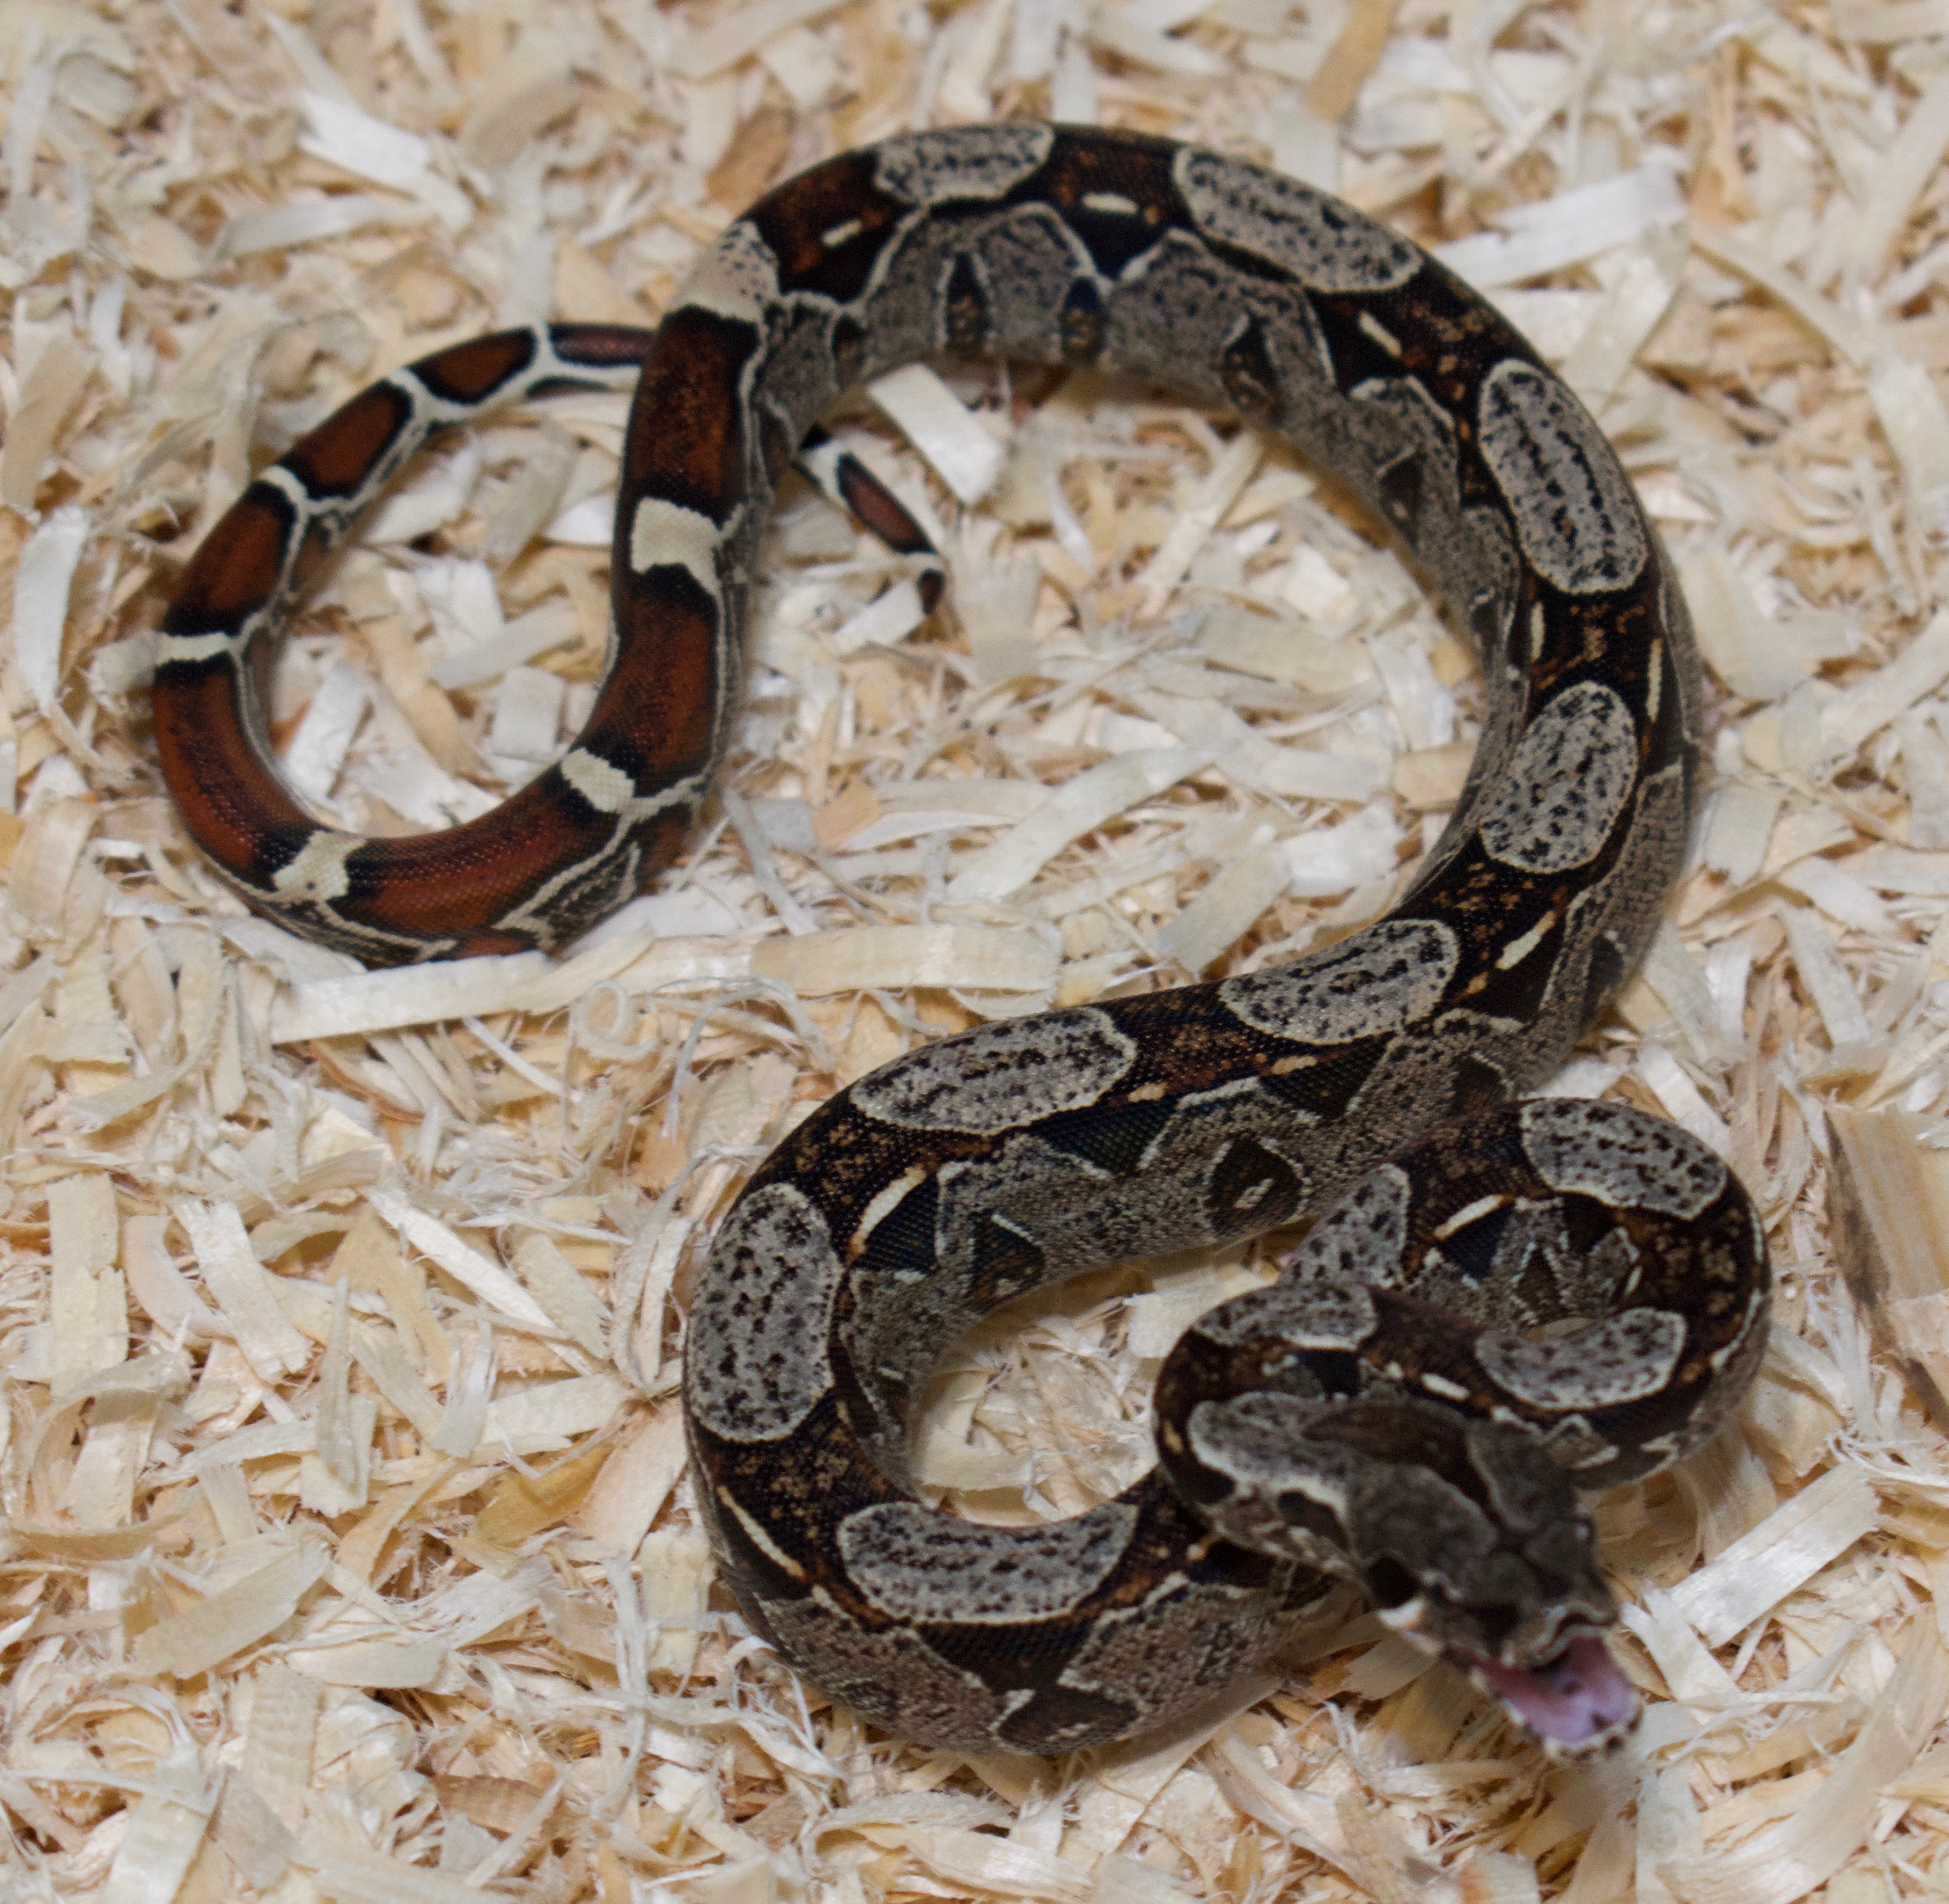 IMG Boa Constrictor by KL Constrictors